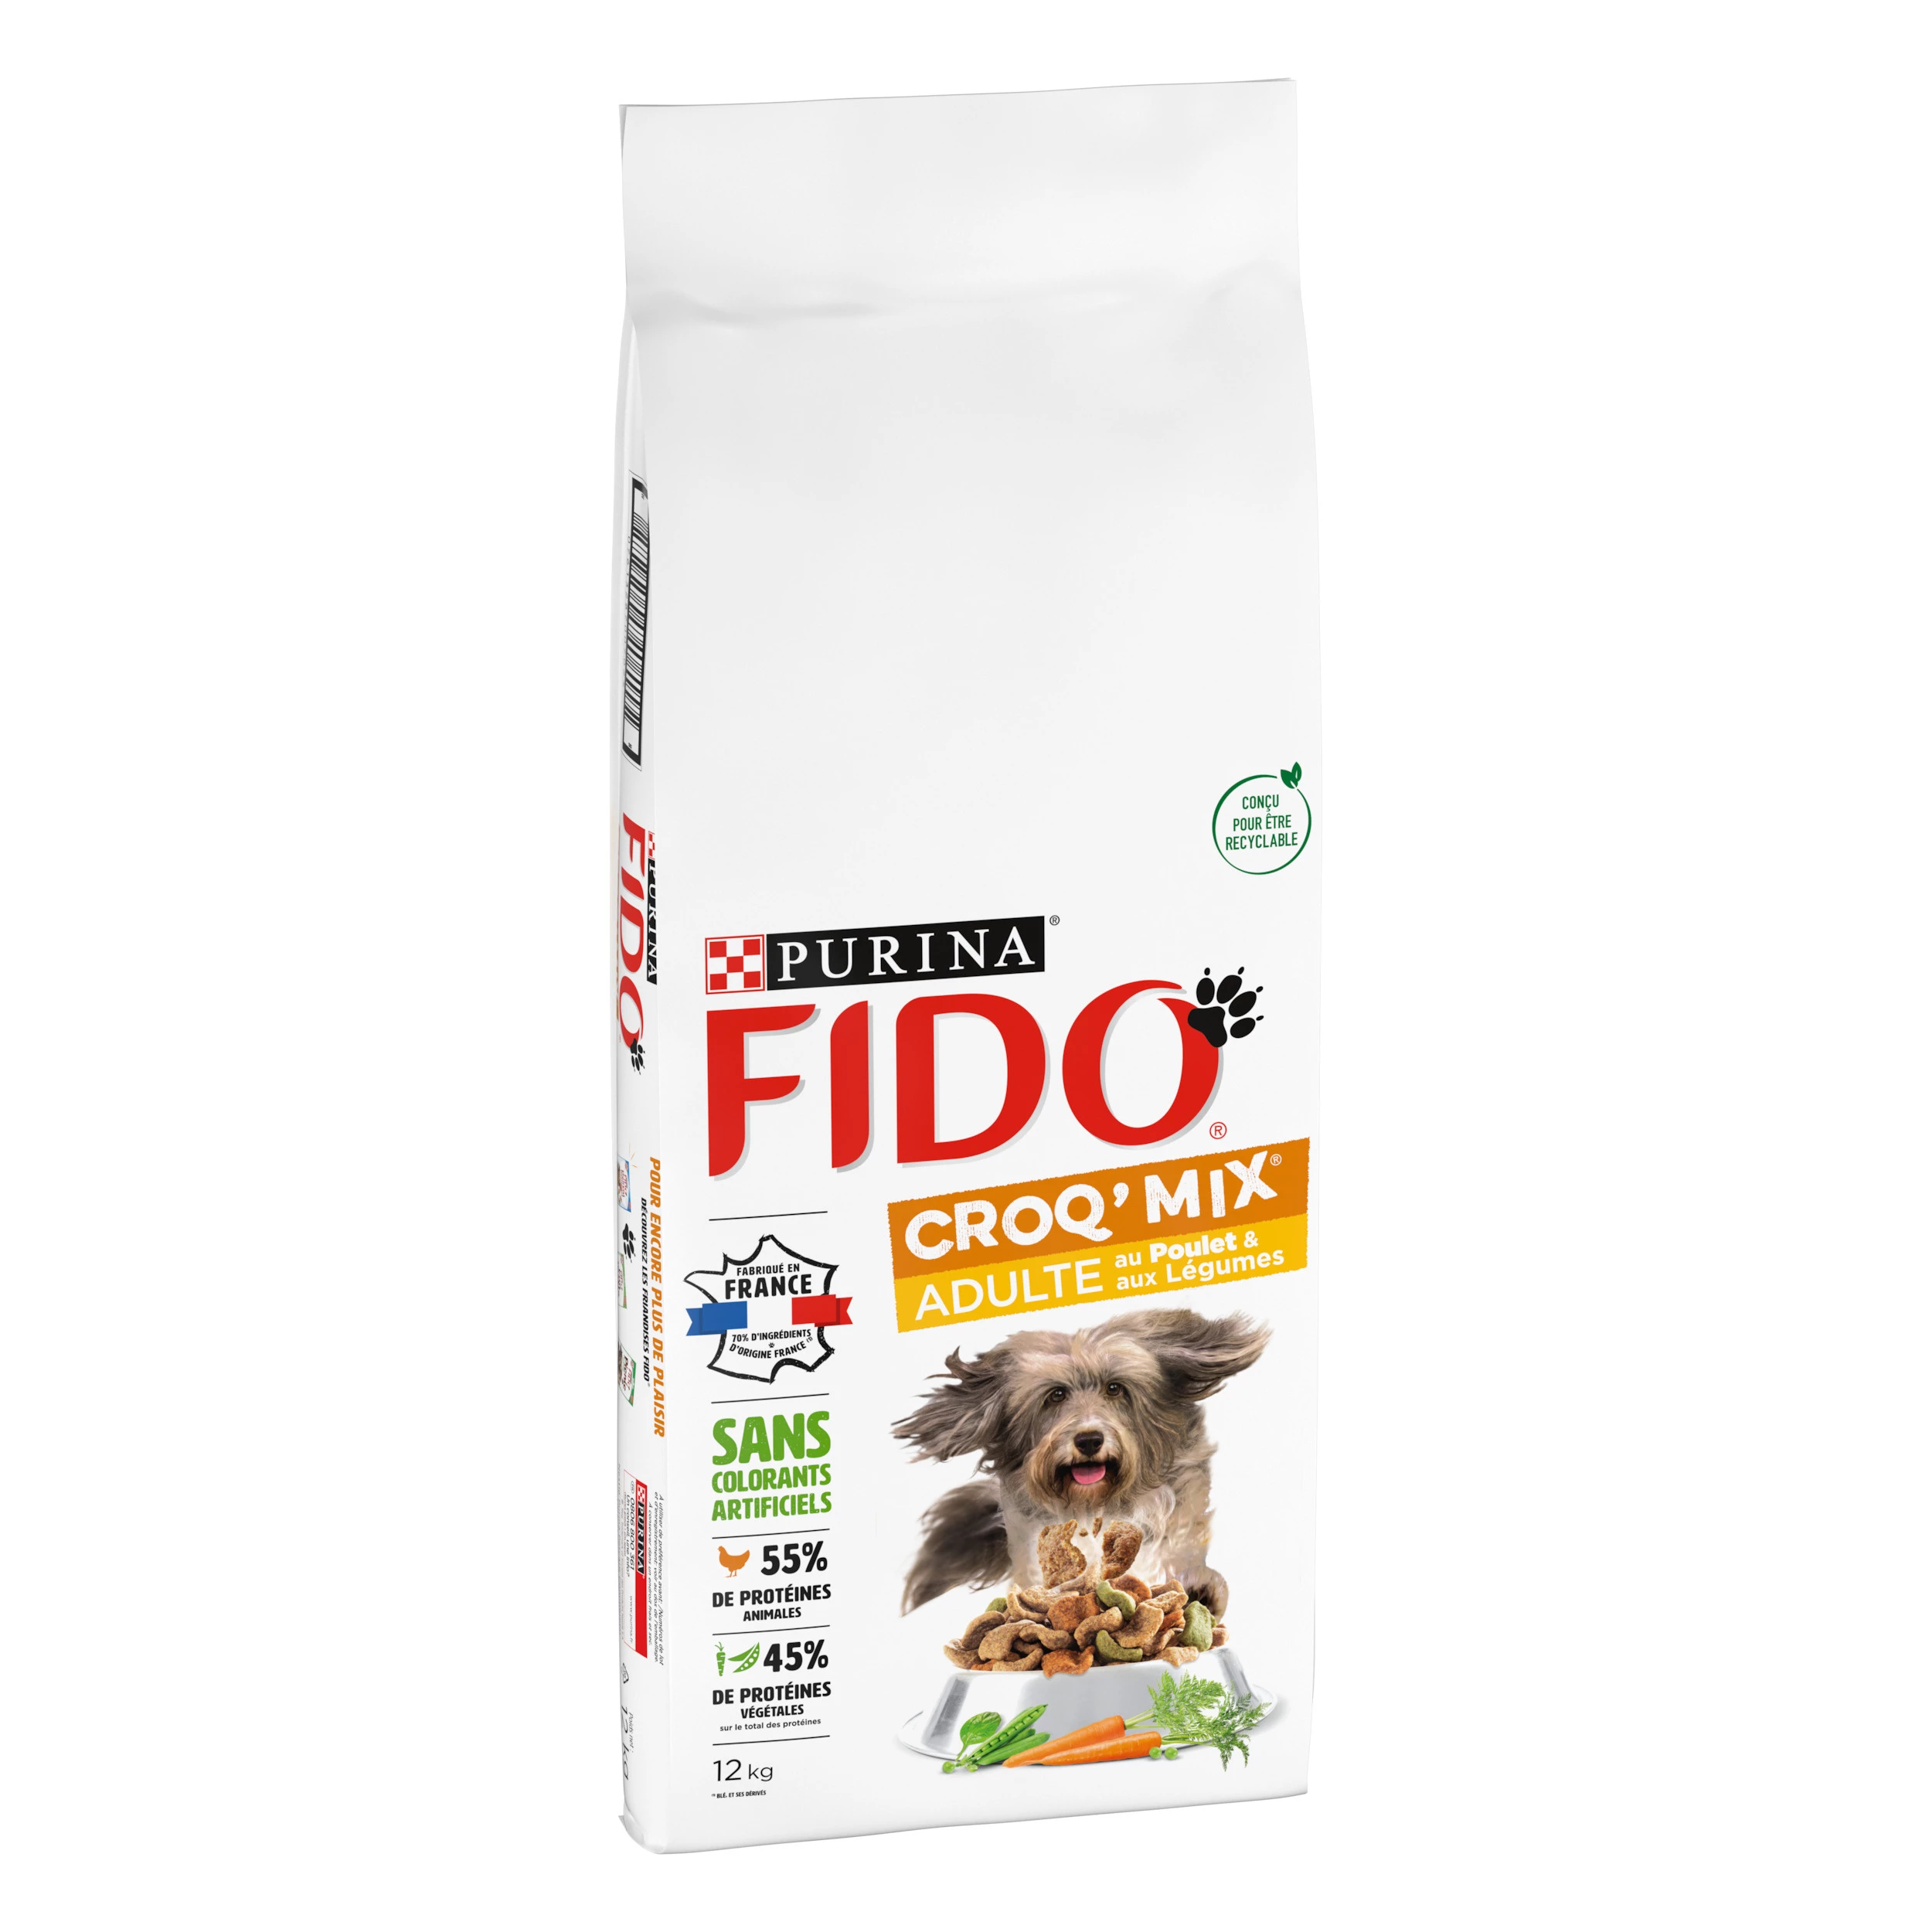 Fido Croq mix Adult with Chicken and vegetables 12kg - PURINA